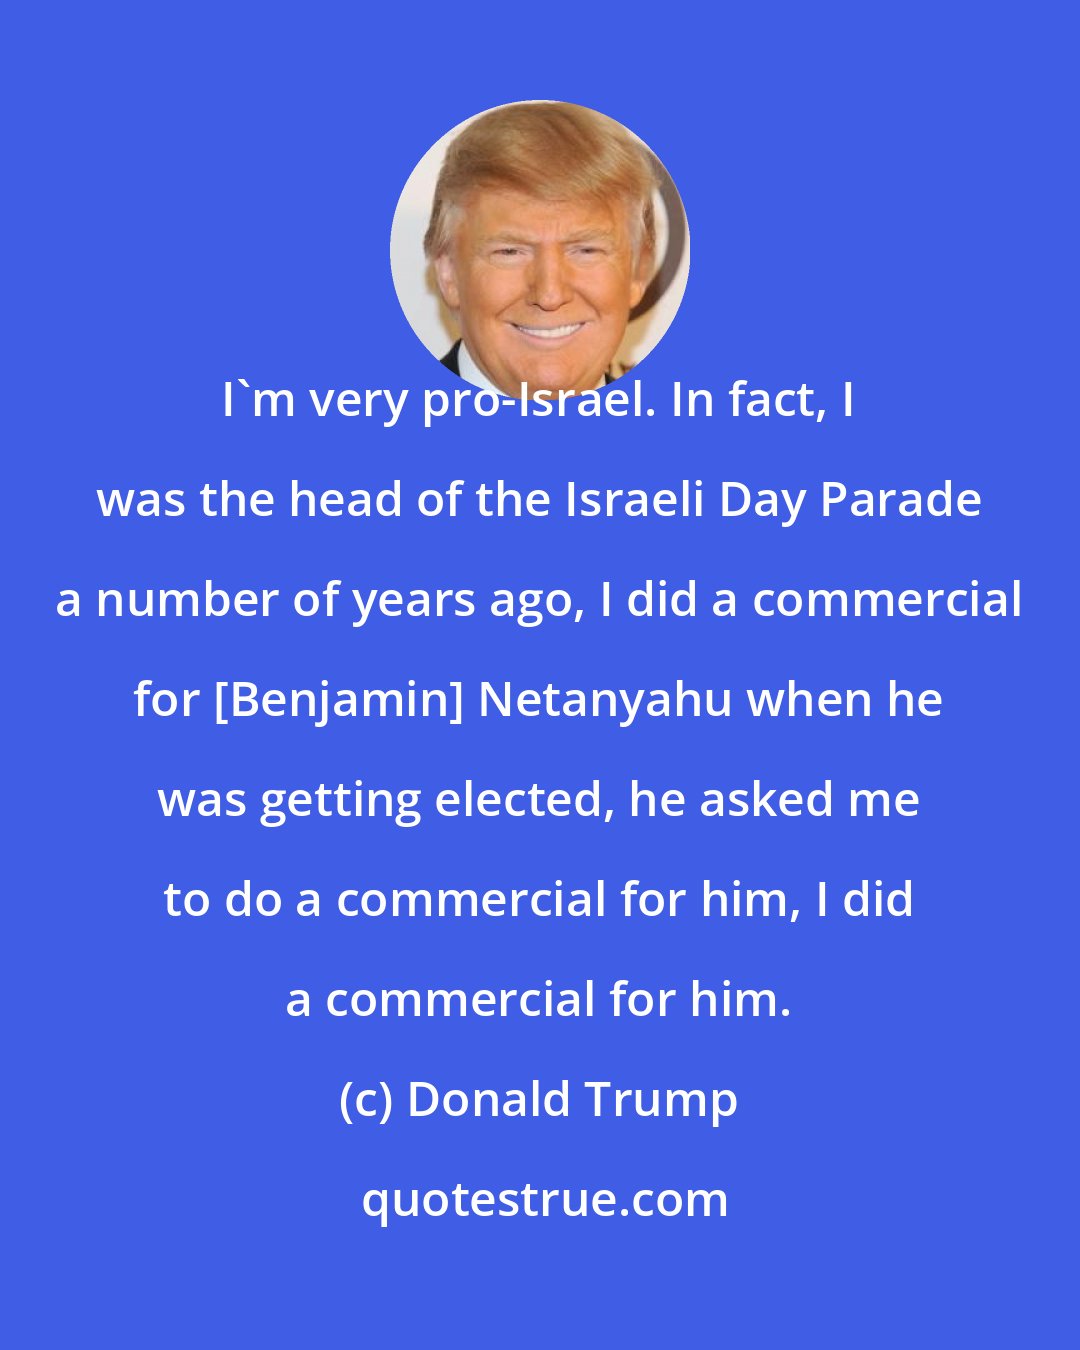 Donald Trump: I'm very pro-Israel. In fact, I was the head of the Israeli Day Parade a number of years ago, I did a commercial for [Benjamin] Netanyahu when he was getting elected, he asked me to do a commercial for him, I did a commercial for him.